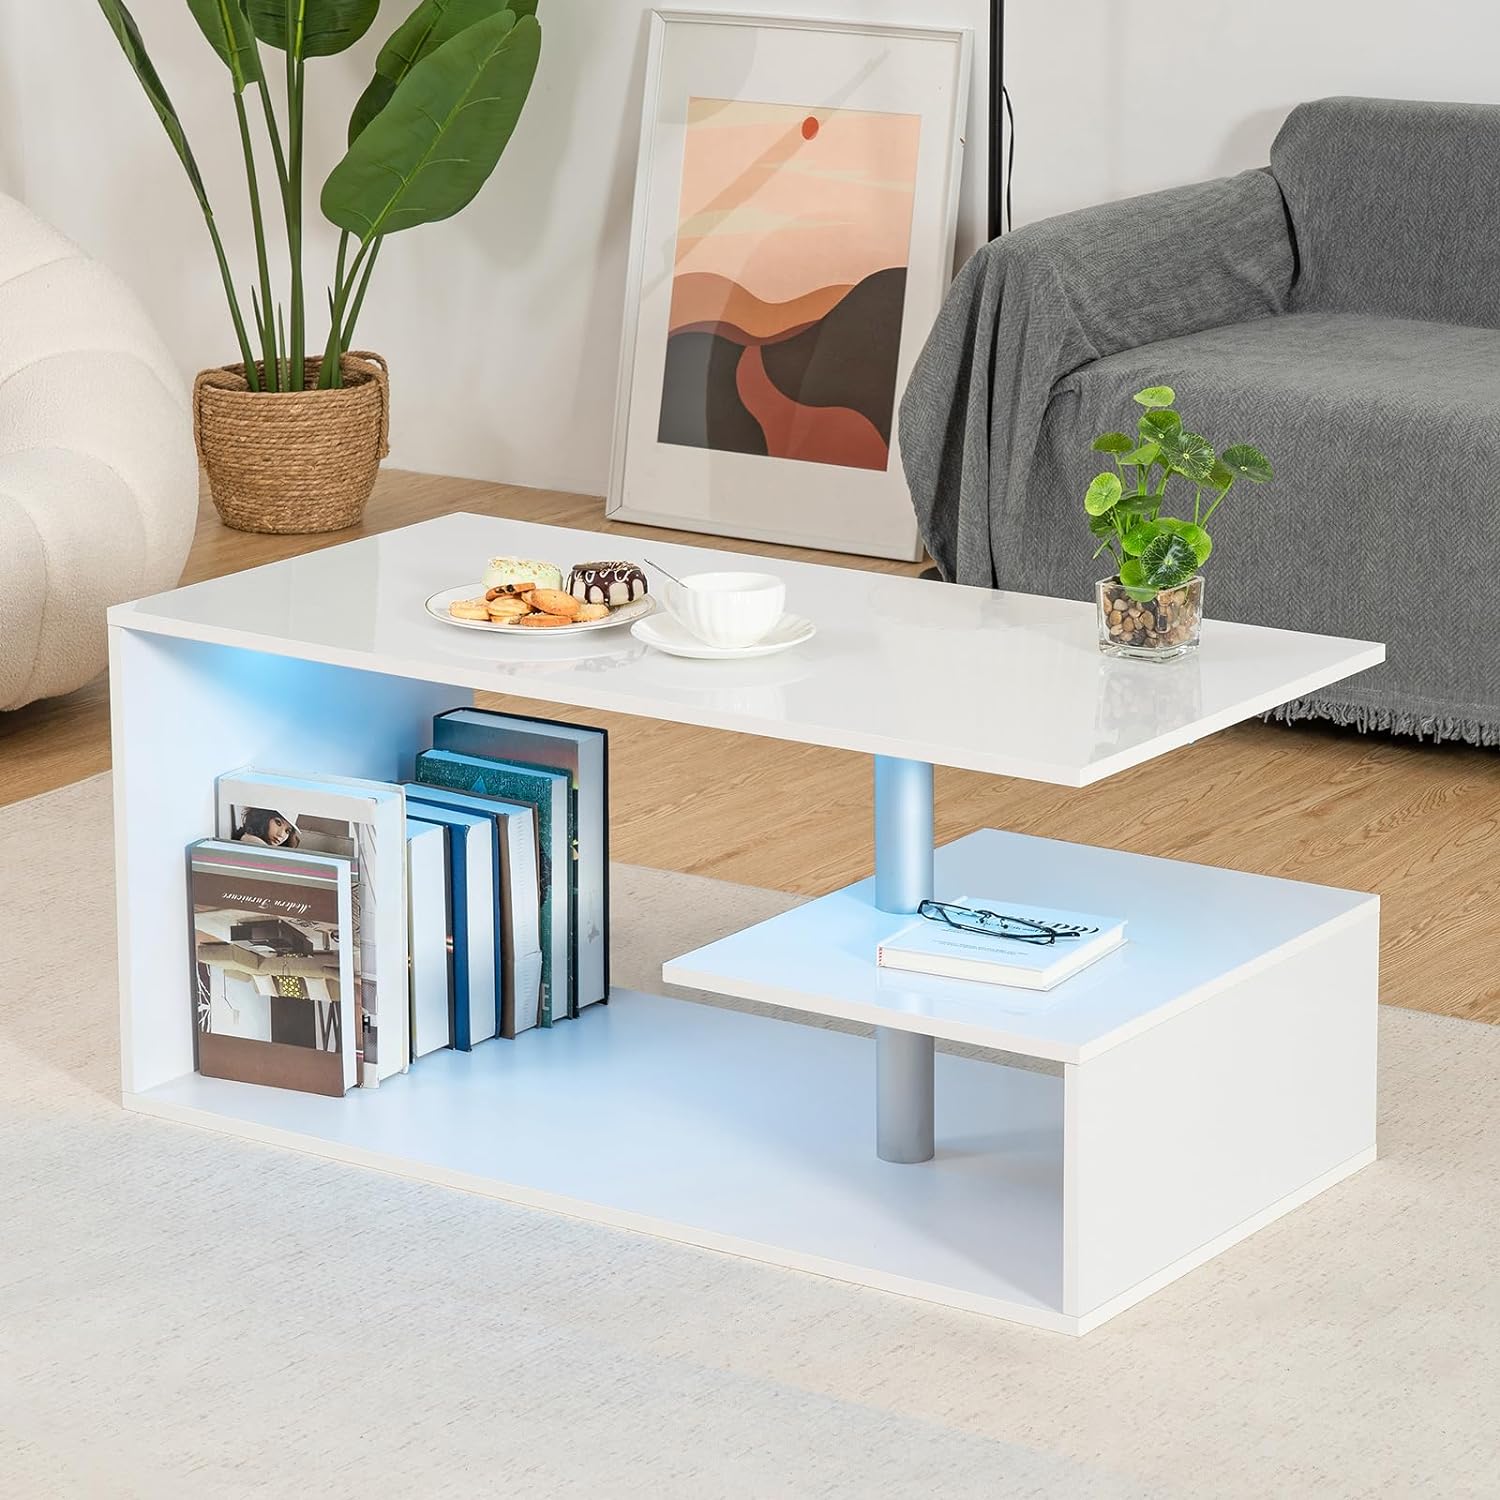 HOMMPA LED Coffee Tables for Living Room Modern Coffee Table with S-Shaped 3 Tiers Open Storage Shelf High Gloss White Center Sofa Tea Table with LED Lights for Home Office Furniture